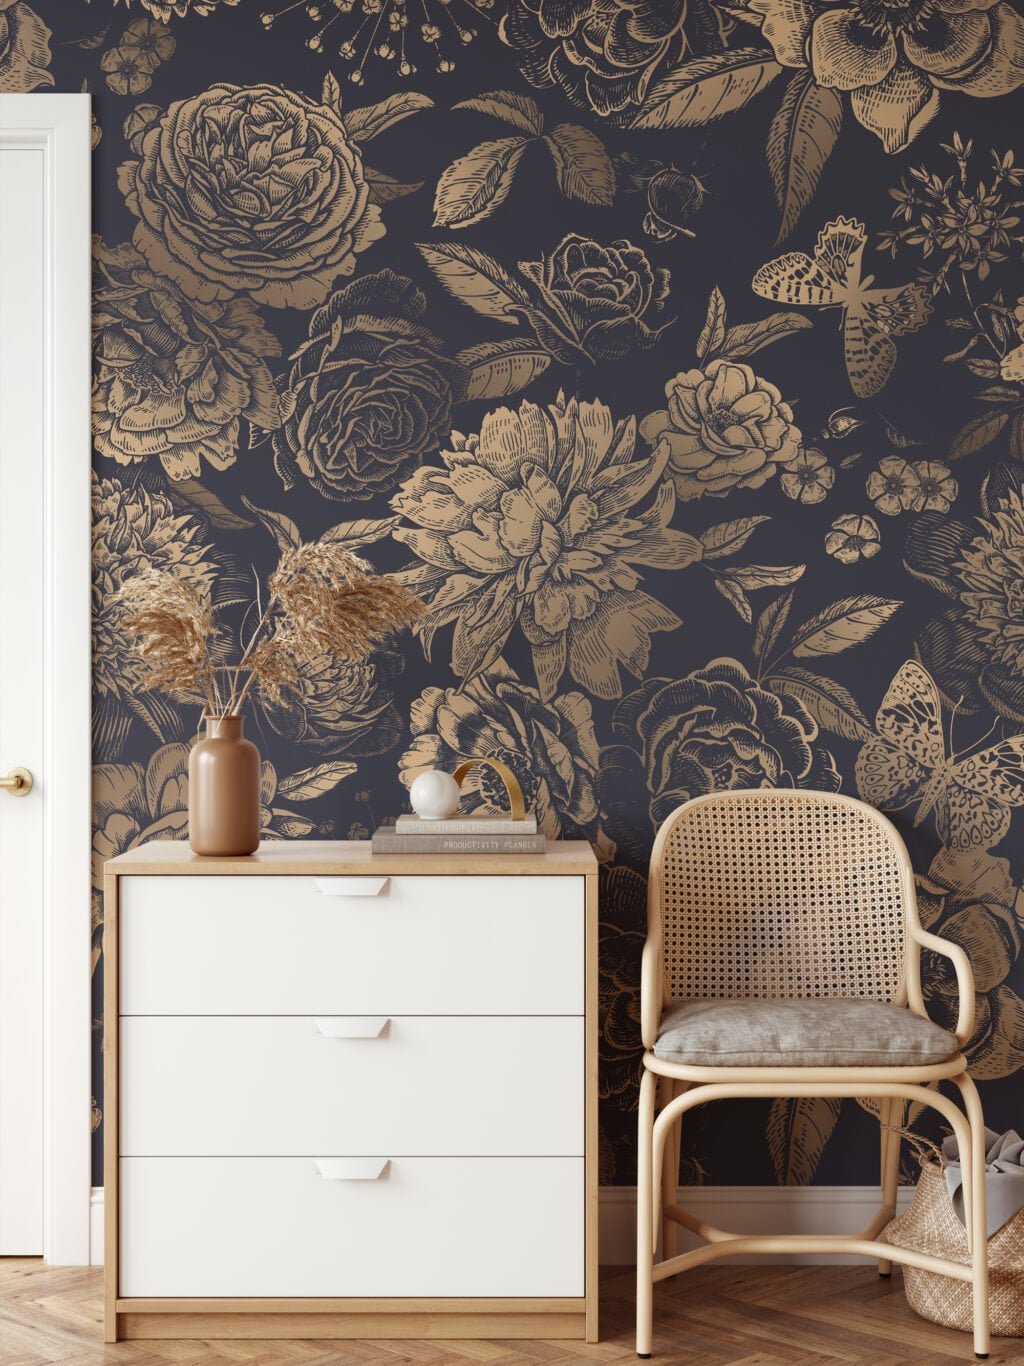 Vintage Style Large Flowers With Butterflies On A Dark Background Wallpaper, Luxurious Gold Floral Peel & Stick Wall Mural